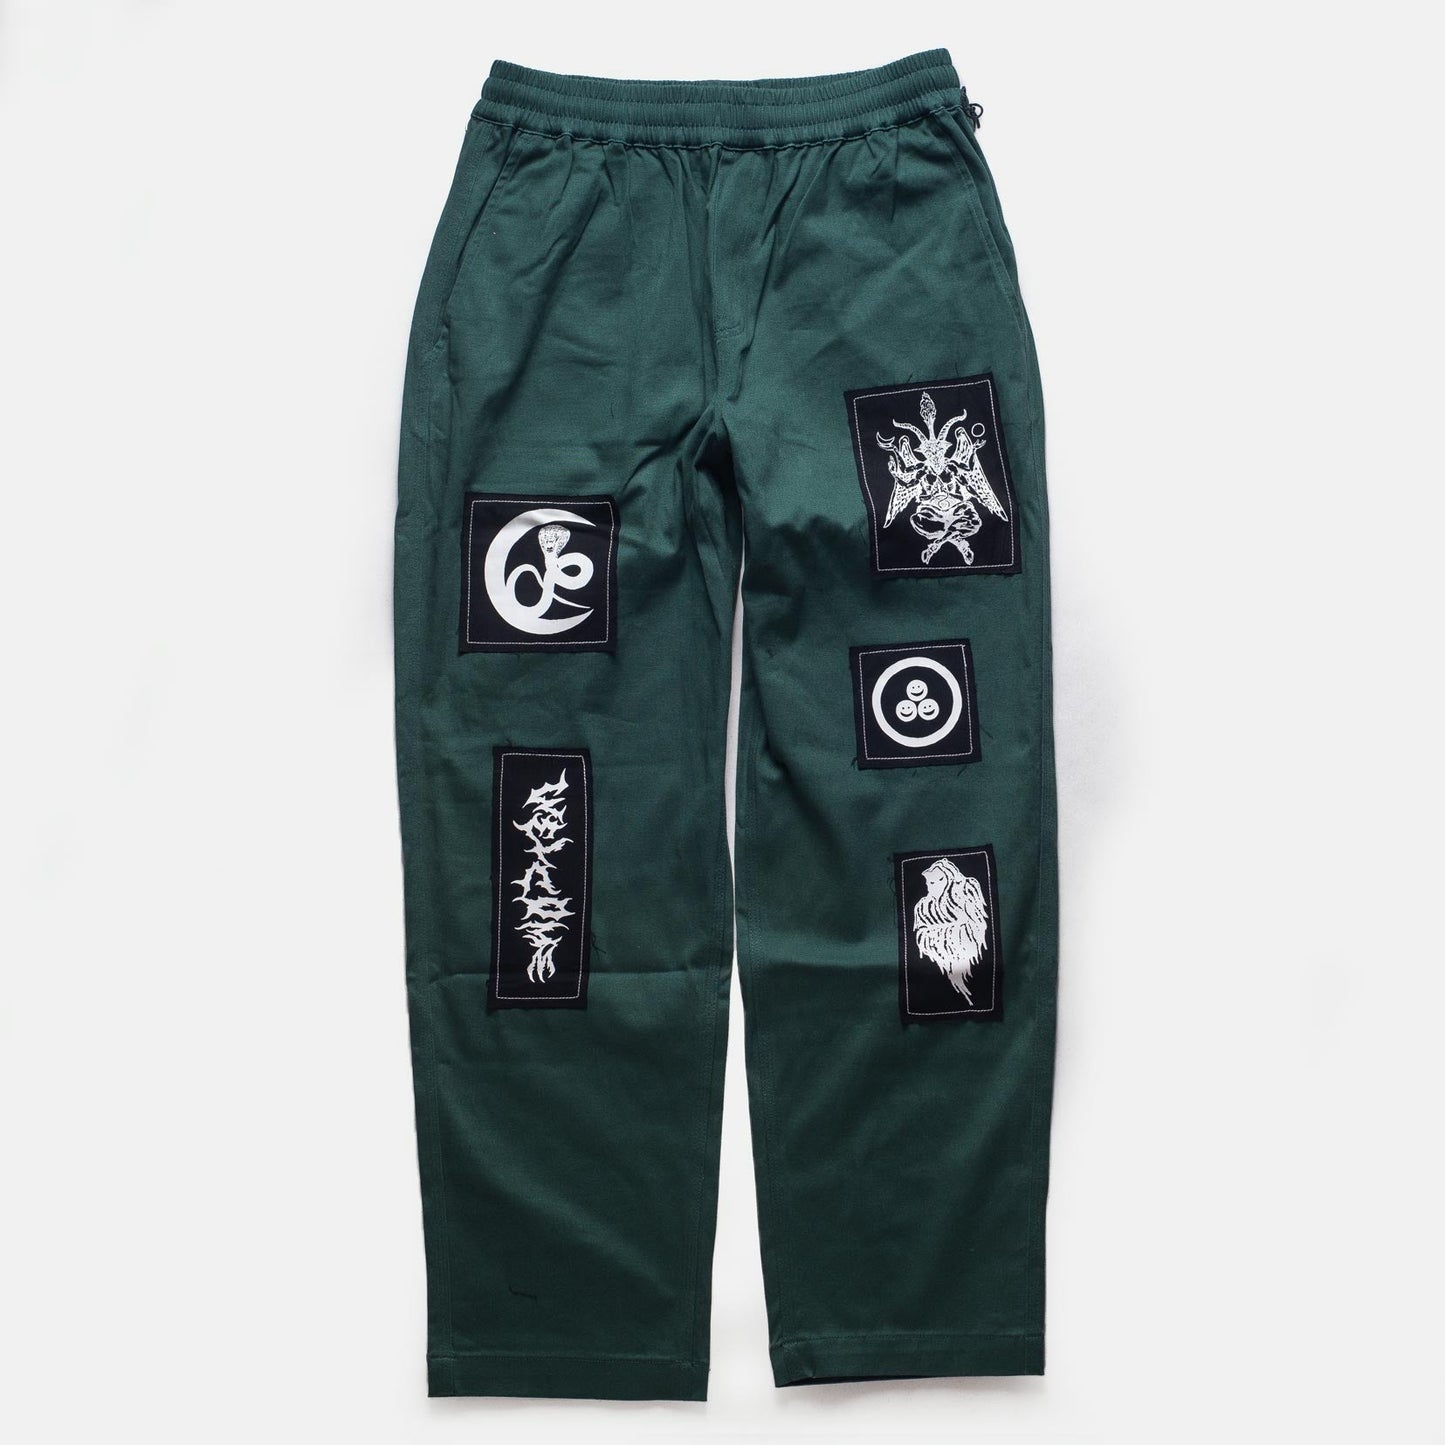 Welcome Skateboards - Volume Twill Elastic Pant W/ Patches - Evergreen - Parliamentskateshop